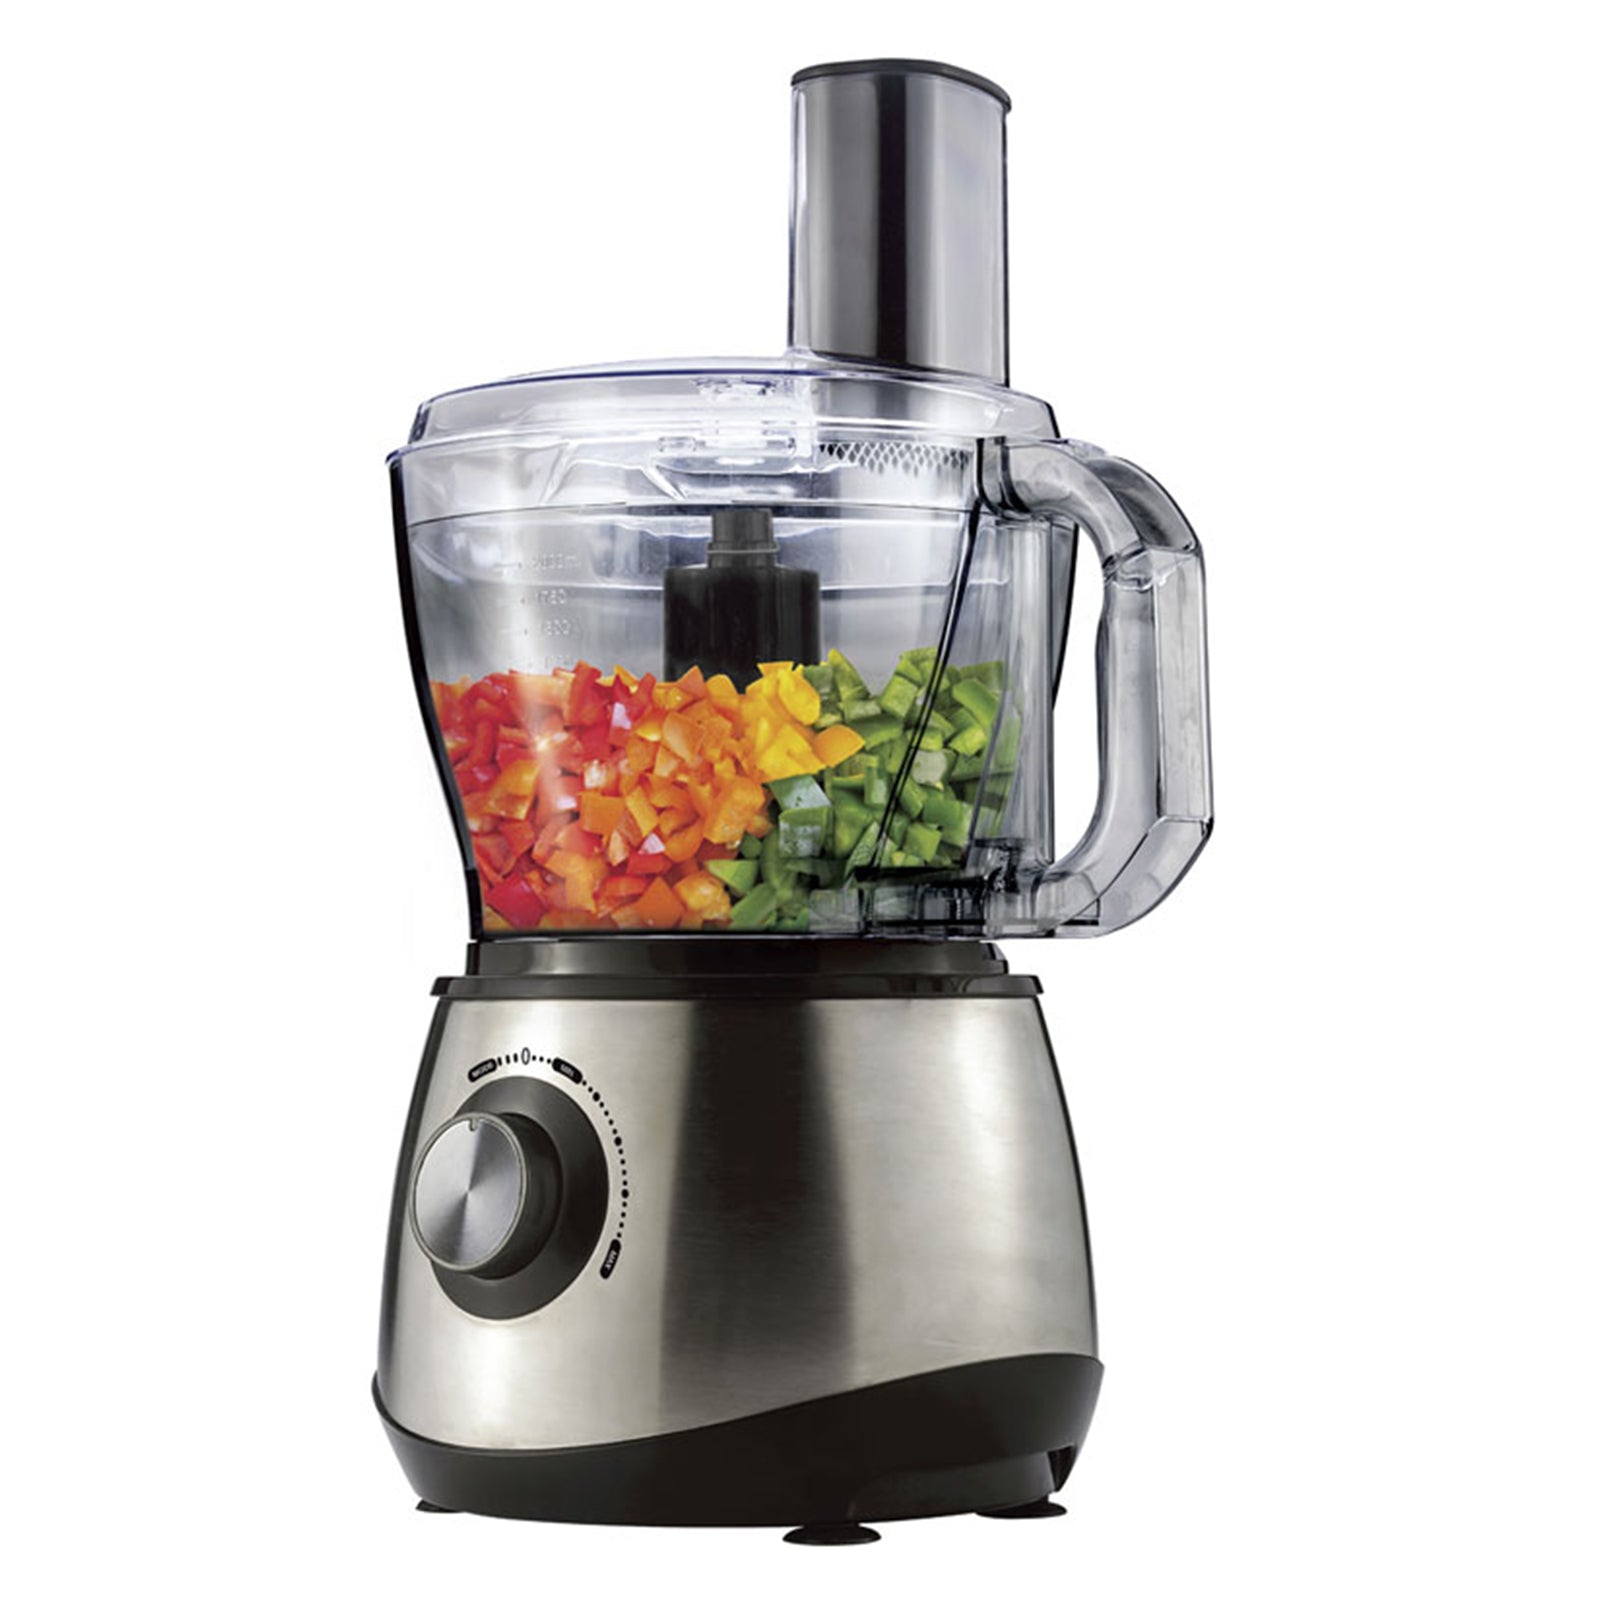 Brentwood Brentwood Select 8-Cup Food Processor, Stainless Steel